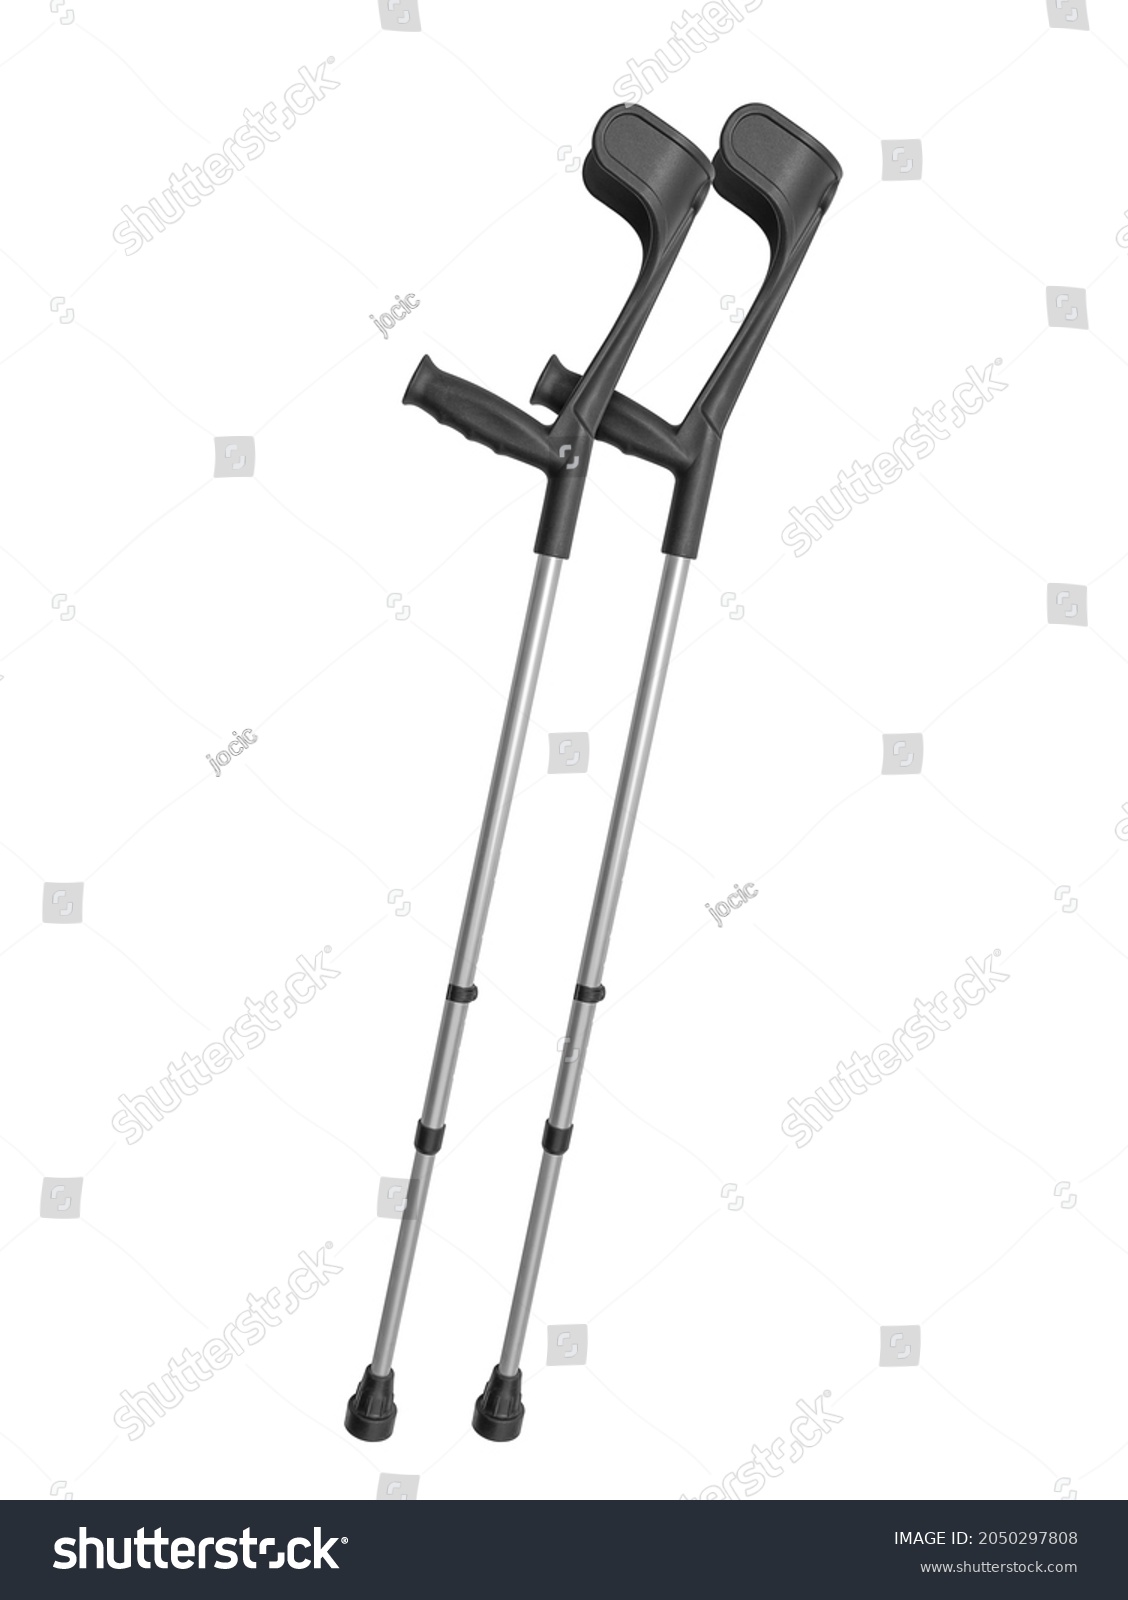 Photo of a pair of crutches isolated on white with detailed clipping path #2050297808